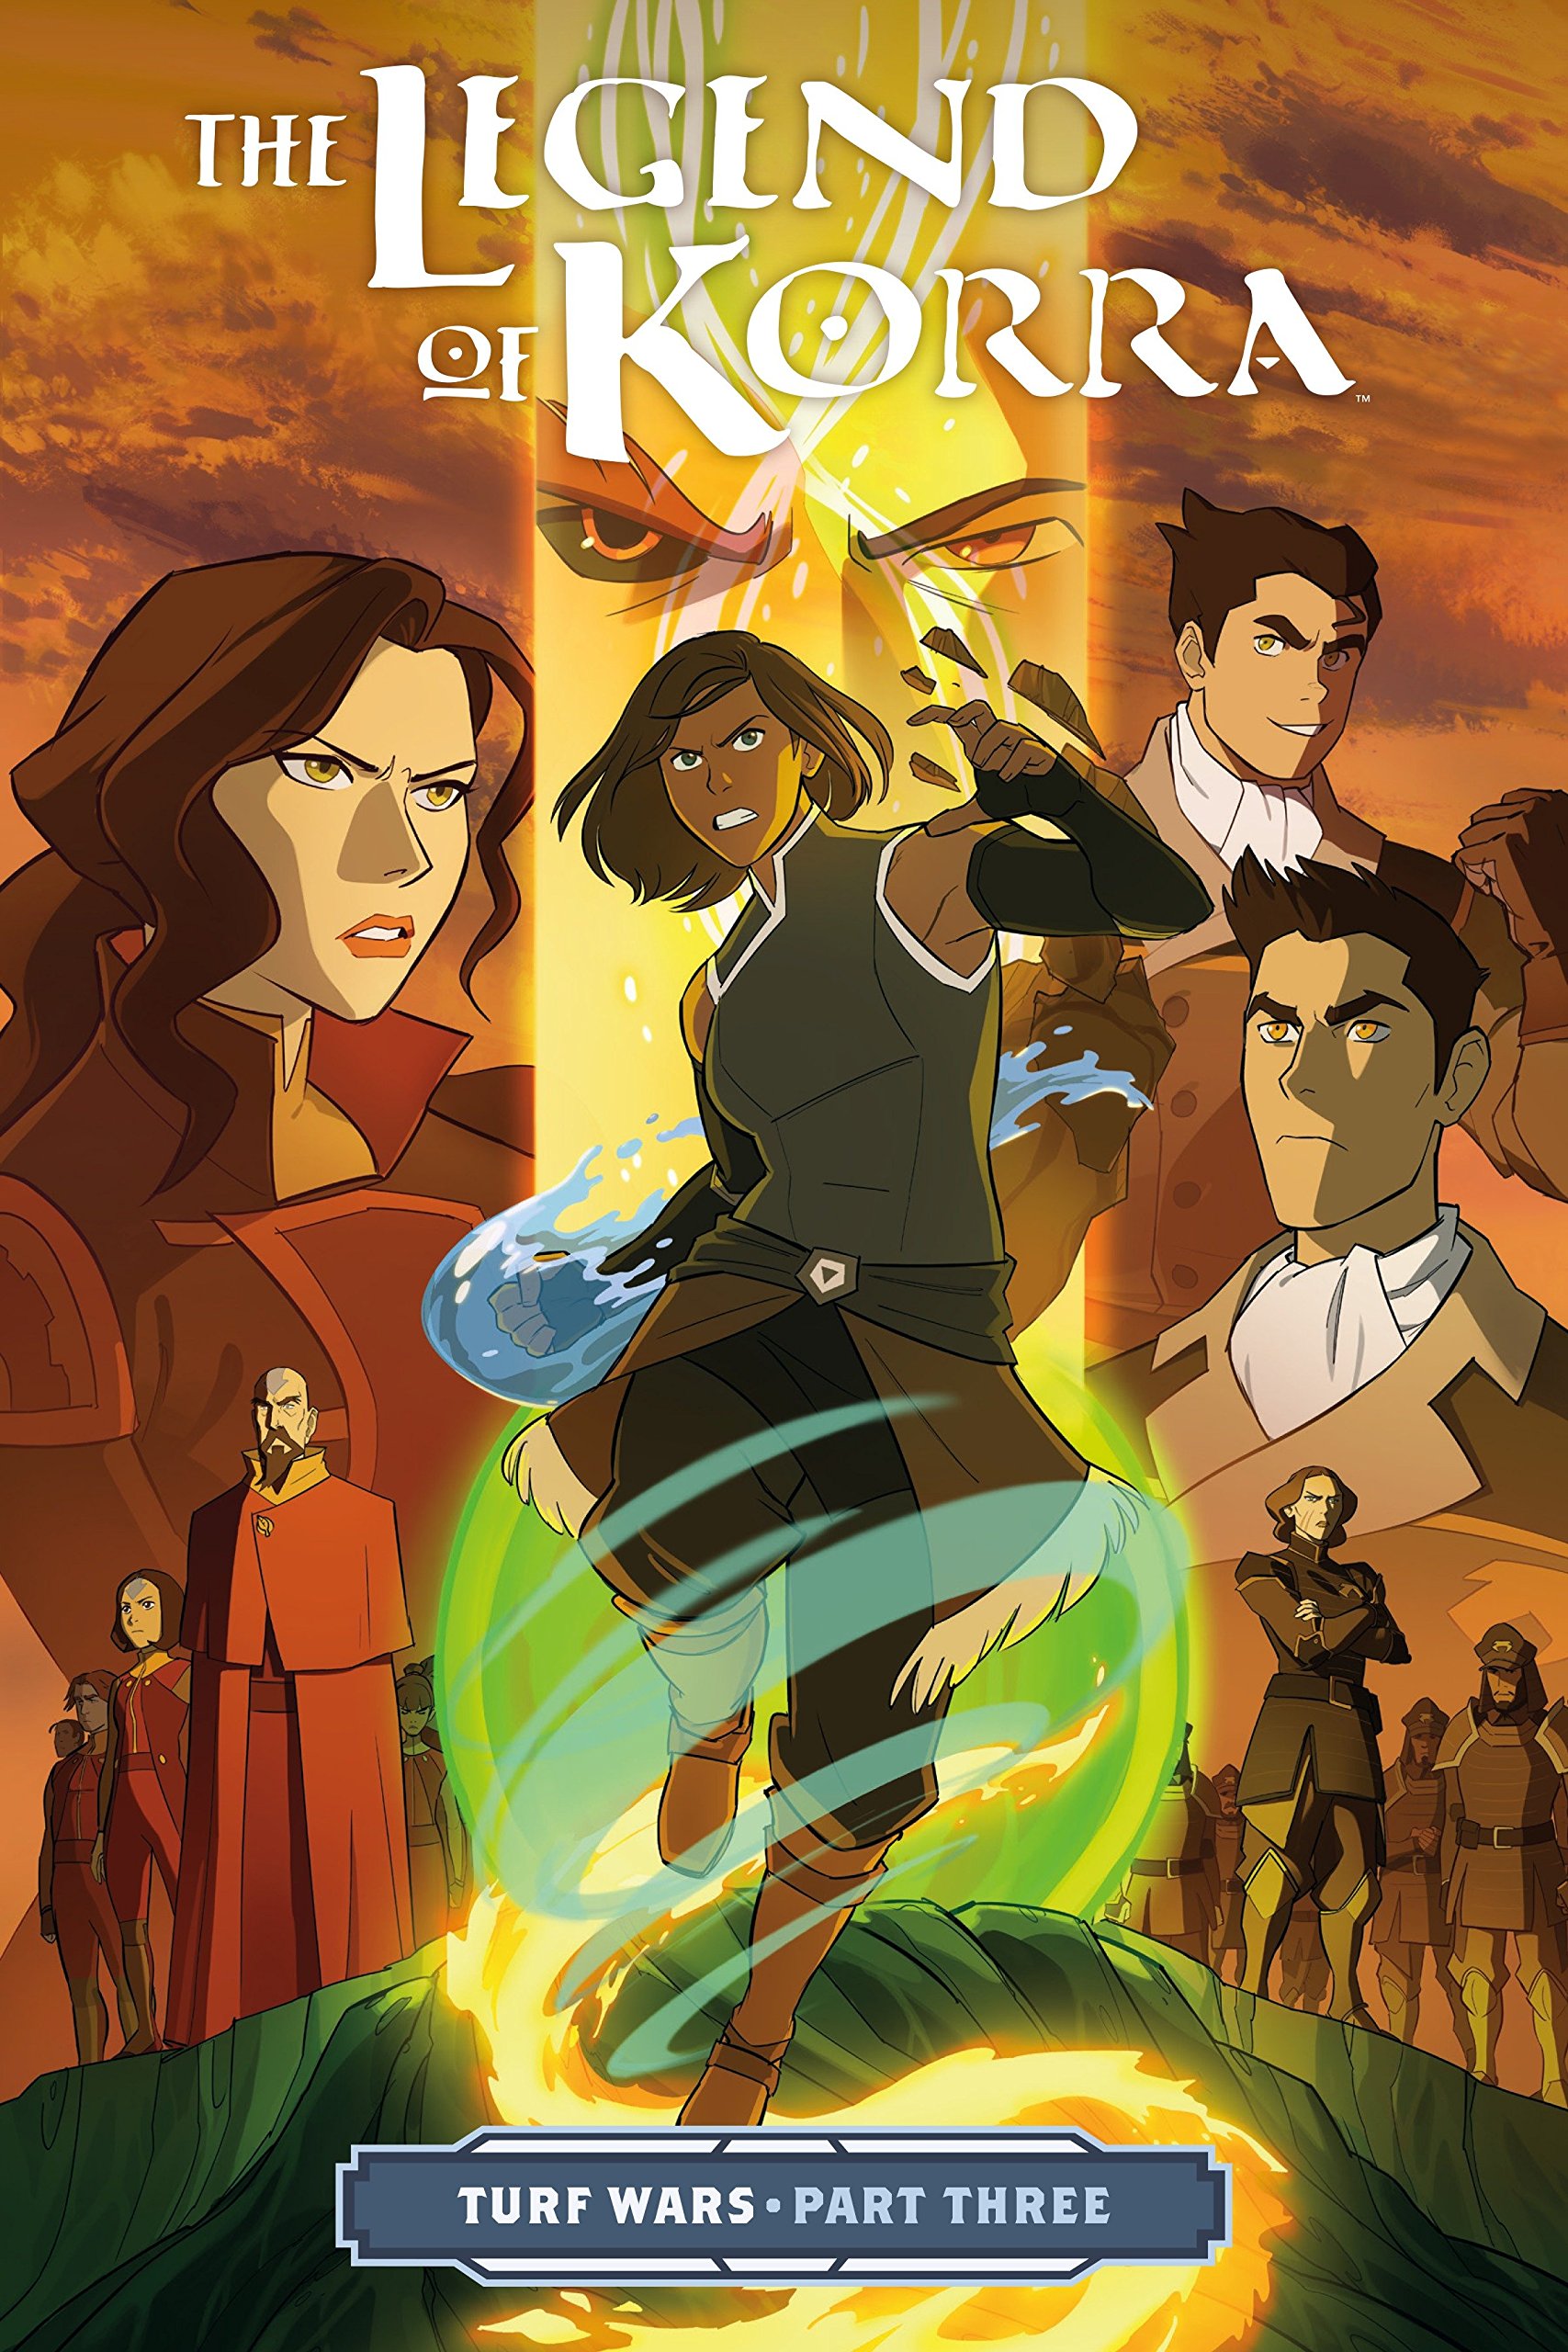 Turf Wars Part One Graphic Novel Motion Comic  The Legend of Korra   Nick Animation  YouTube